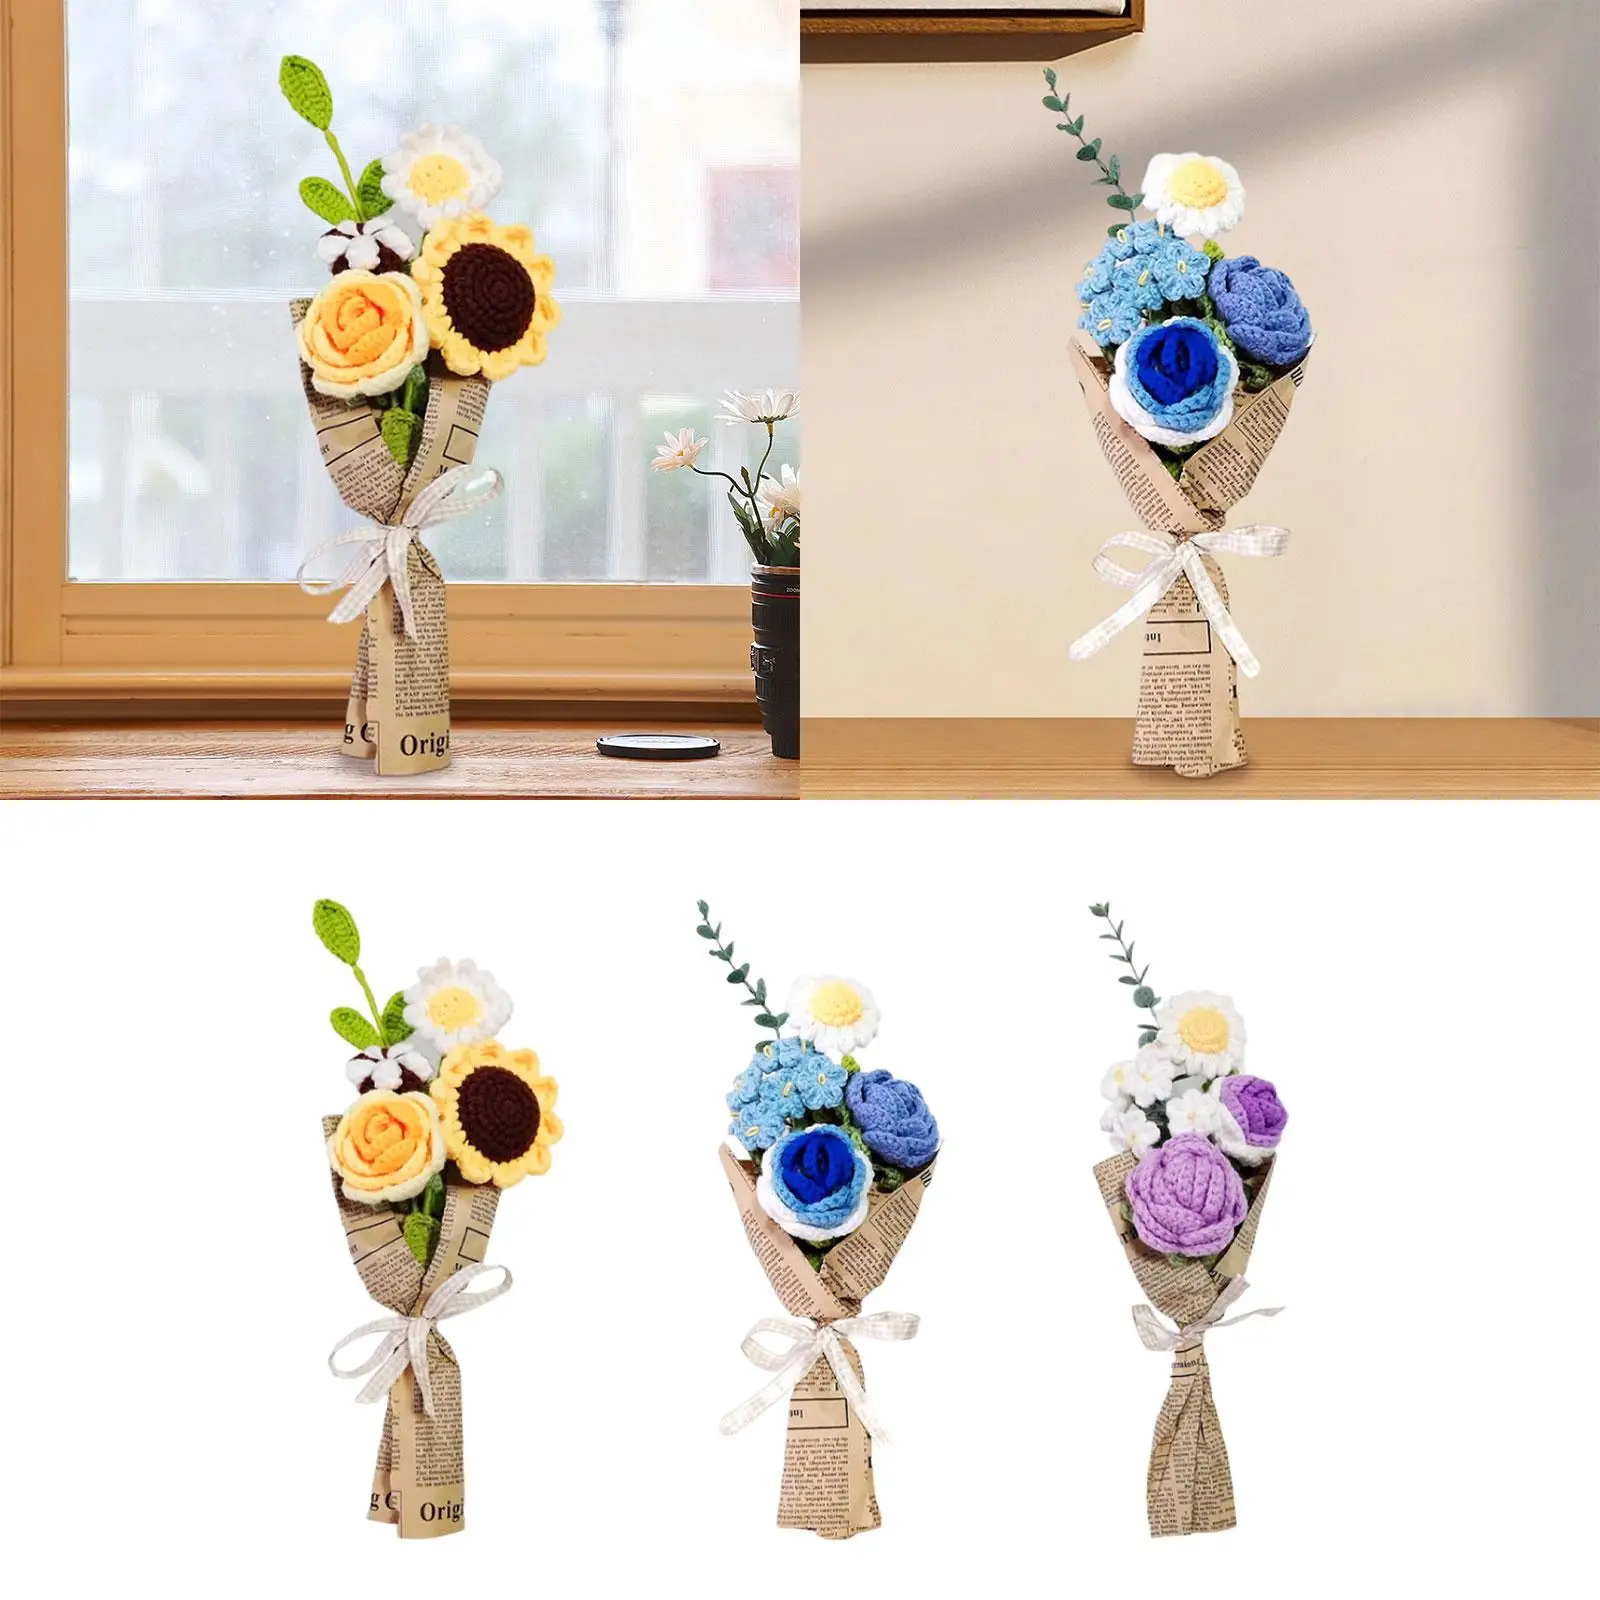 Completed Crochet Flowers Bouquet Artificial Flowers Home Decor Durable Handmade Knitted Bouquet for Home Wedding Decoration